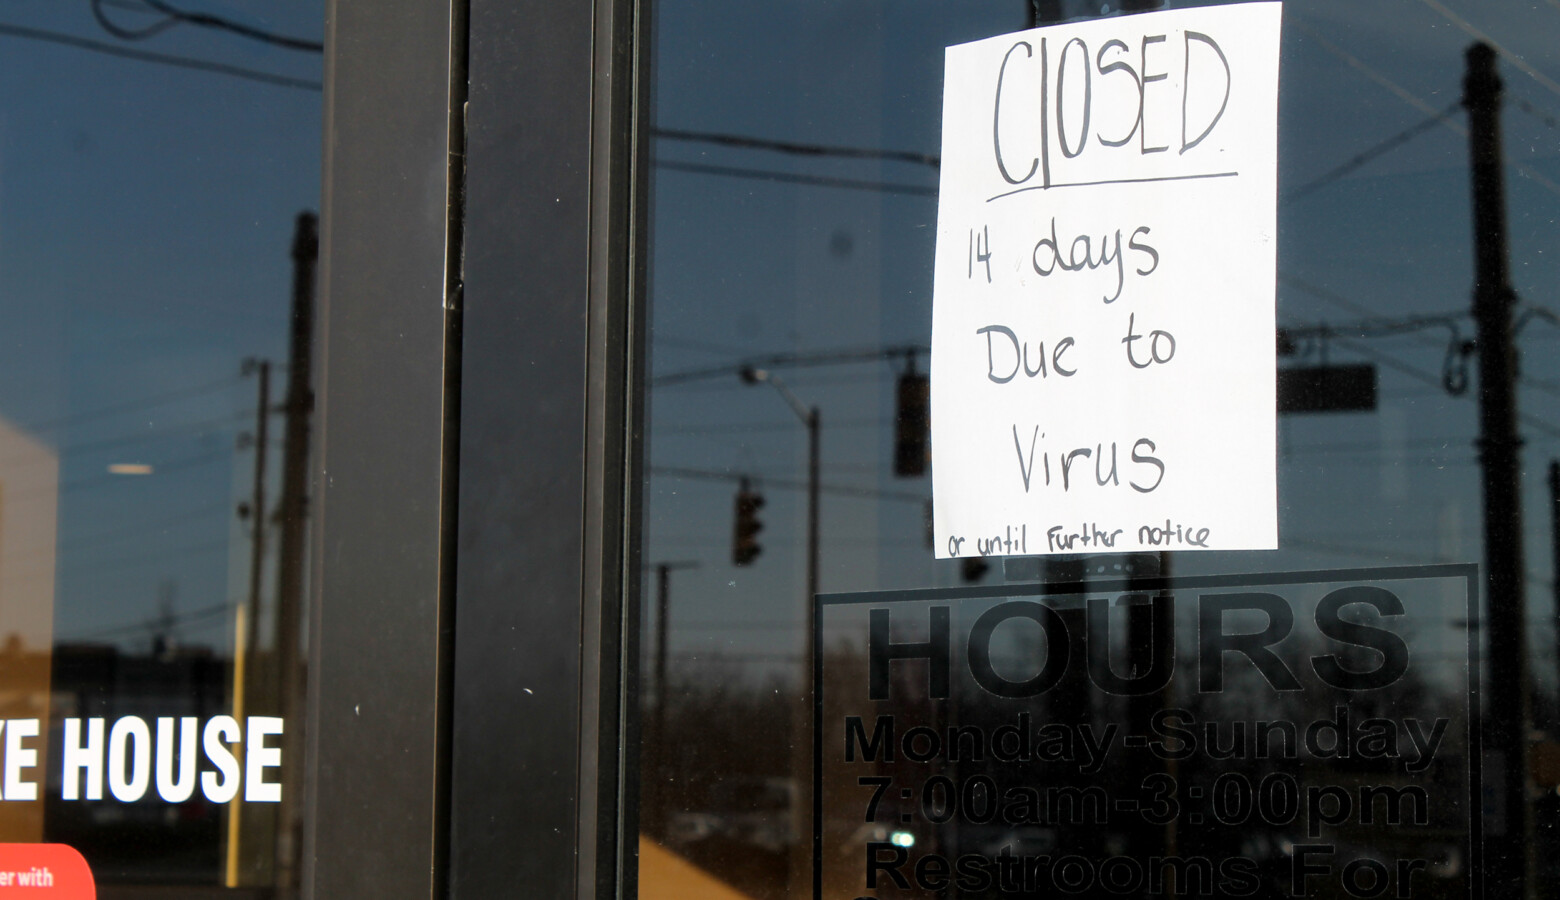 If a business is fined or shut down in response to an emergency health order, businesses could now appeal that decision to their city council or county commissioners. (Lauren Chapman/IPB News)